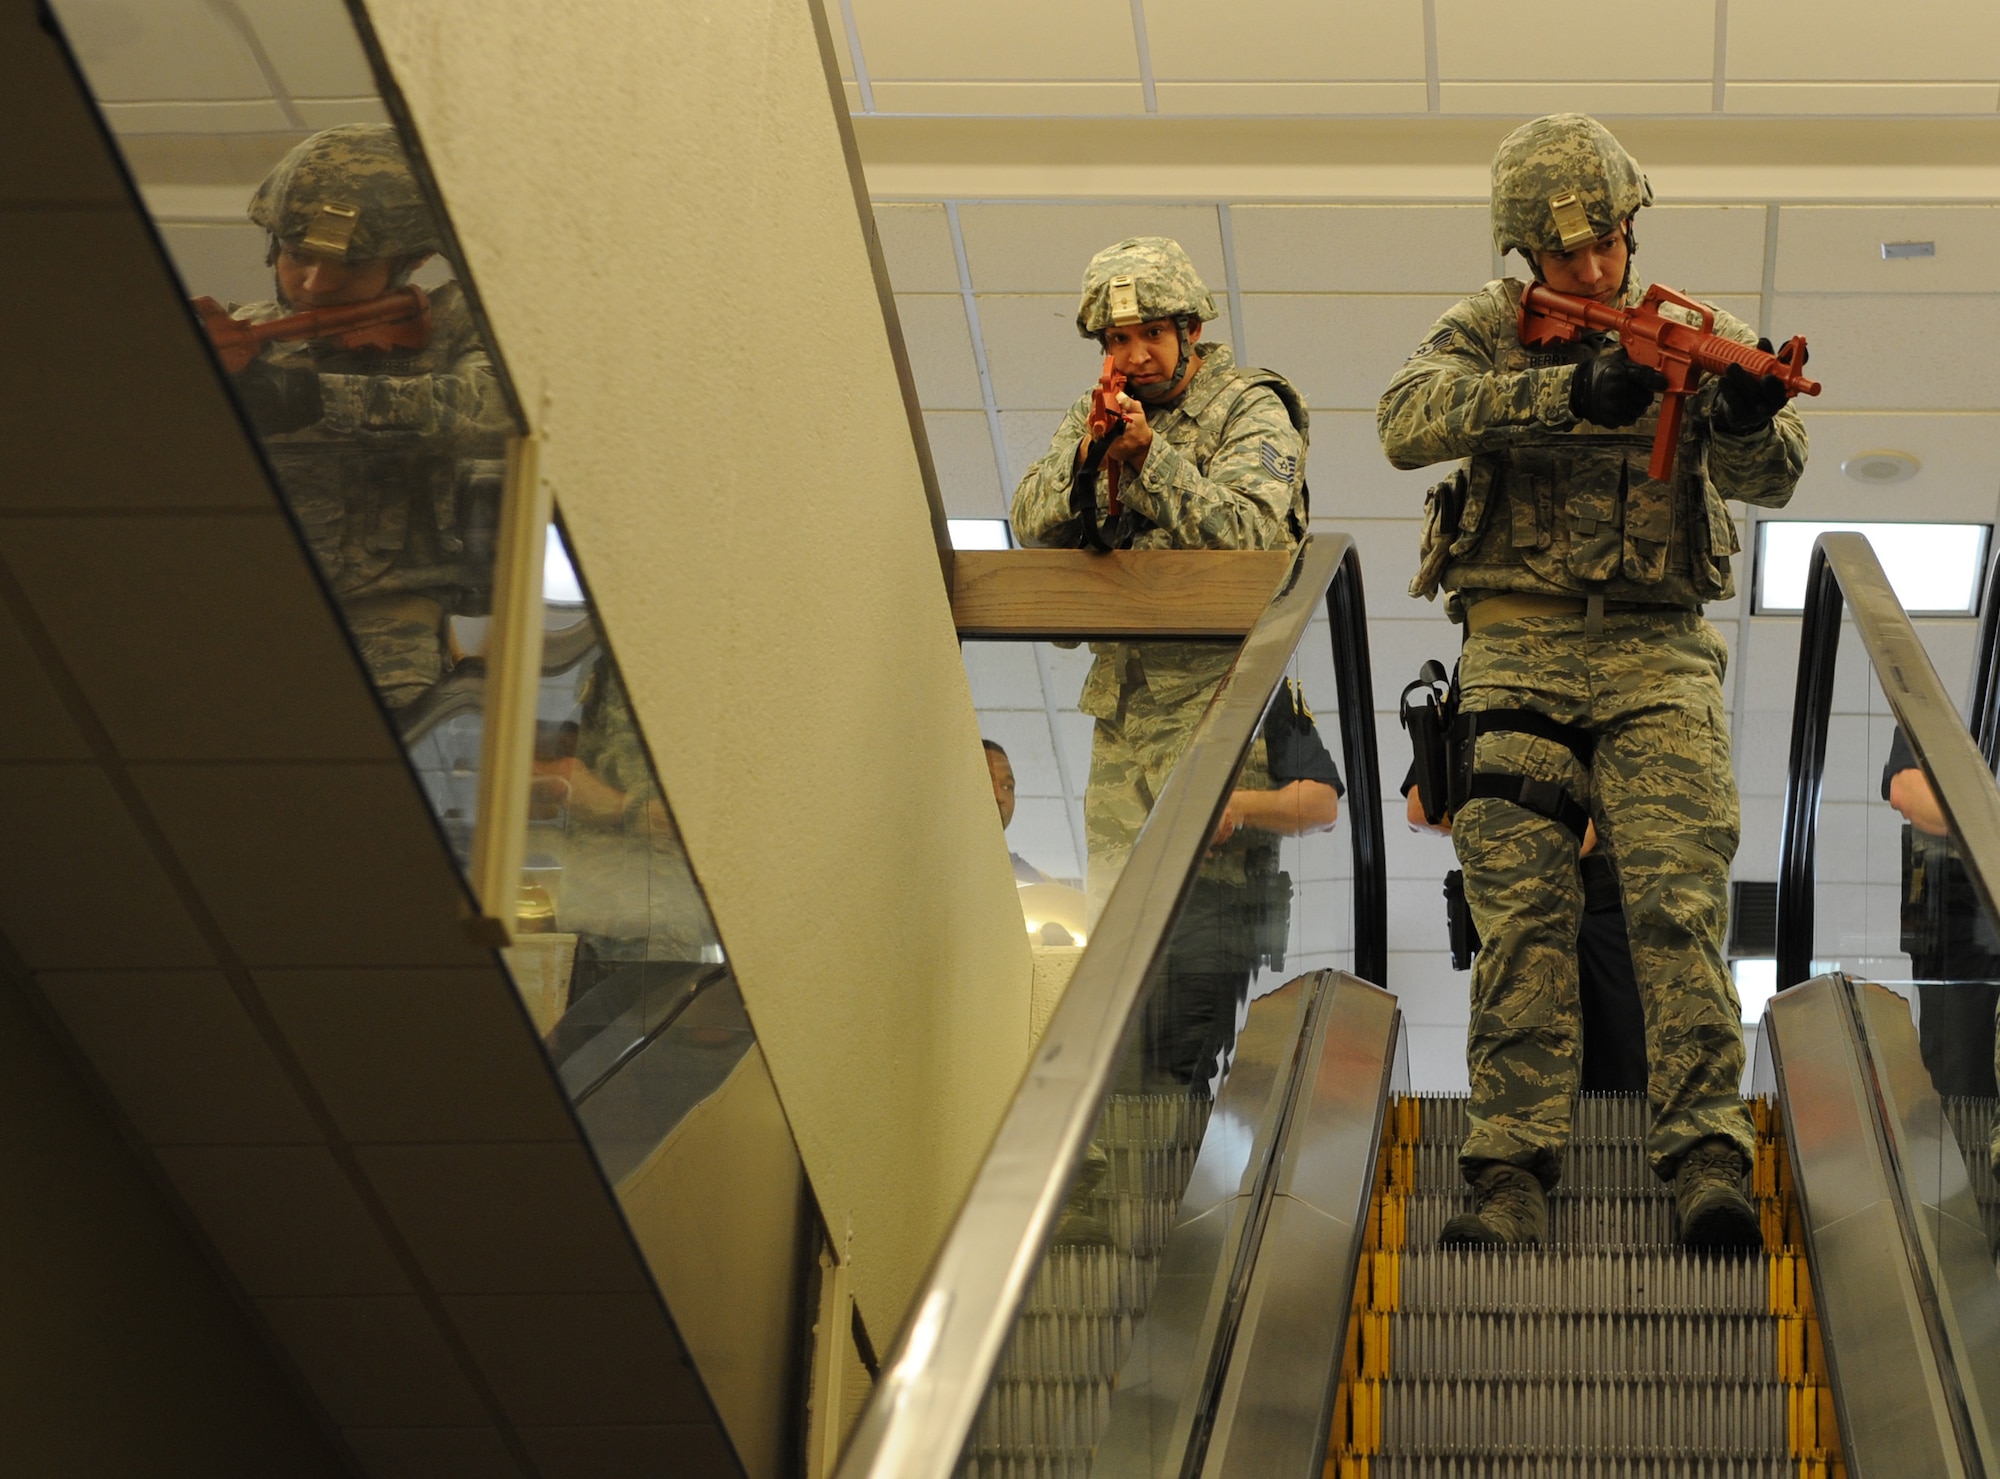 Tech. Sgt. James Herrera, 81st Security Forces Squadron operations NCO in charge, and Staff Sgt. Cody Berry, 81st SFS ?, survey the area for gunmen during Keesler's active shooter exercise at the Keesler Medical Center Mar. 17, 2016, Keesler Air Force Base, Miss.  An active duty Air Force member simulated opening fire at the hospital to test the base's ability to respond to and recover from a mass casualty event. (U.S. Air Force photo by Kemberly Groue)